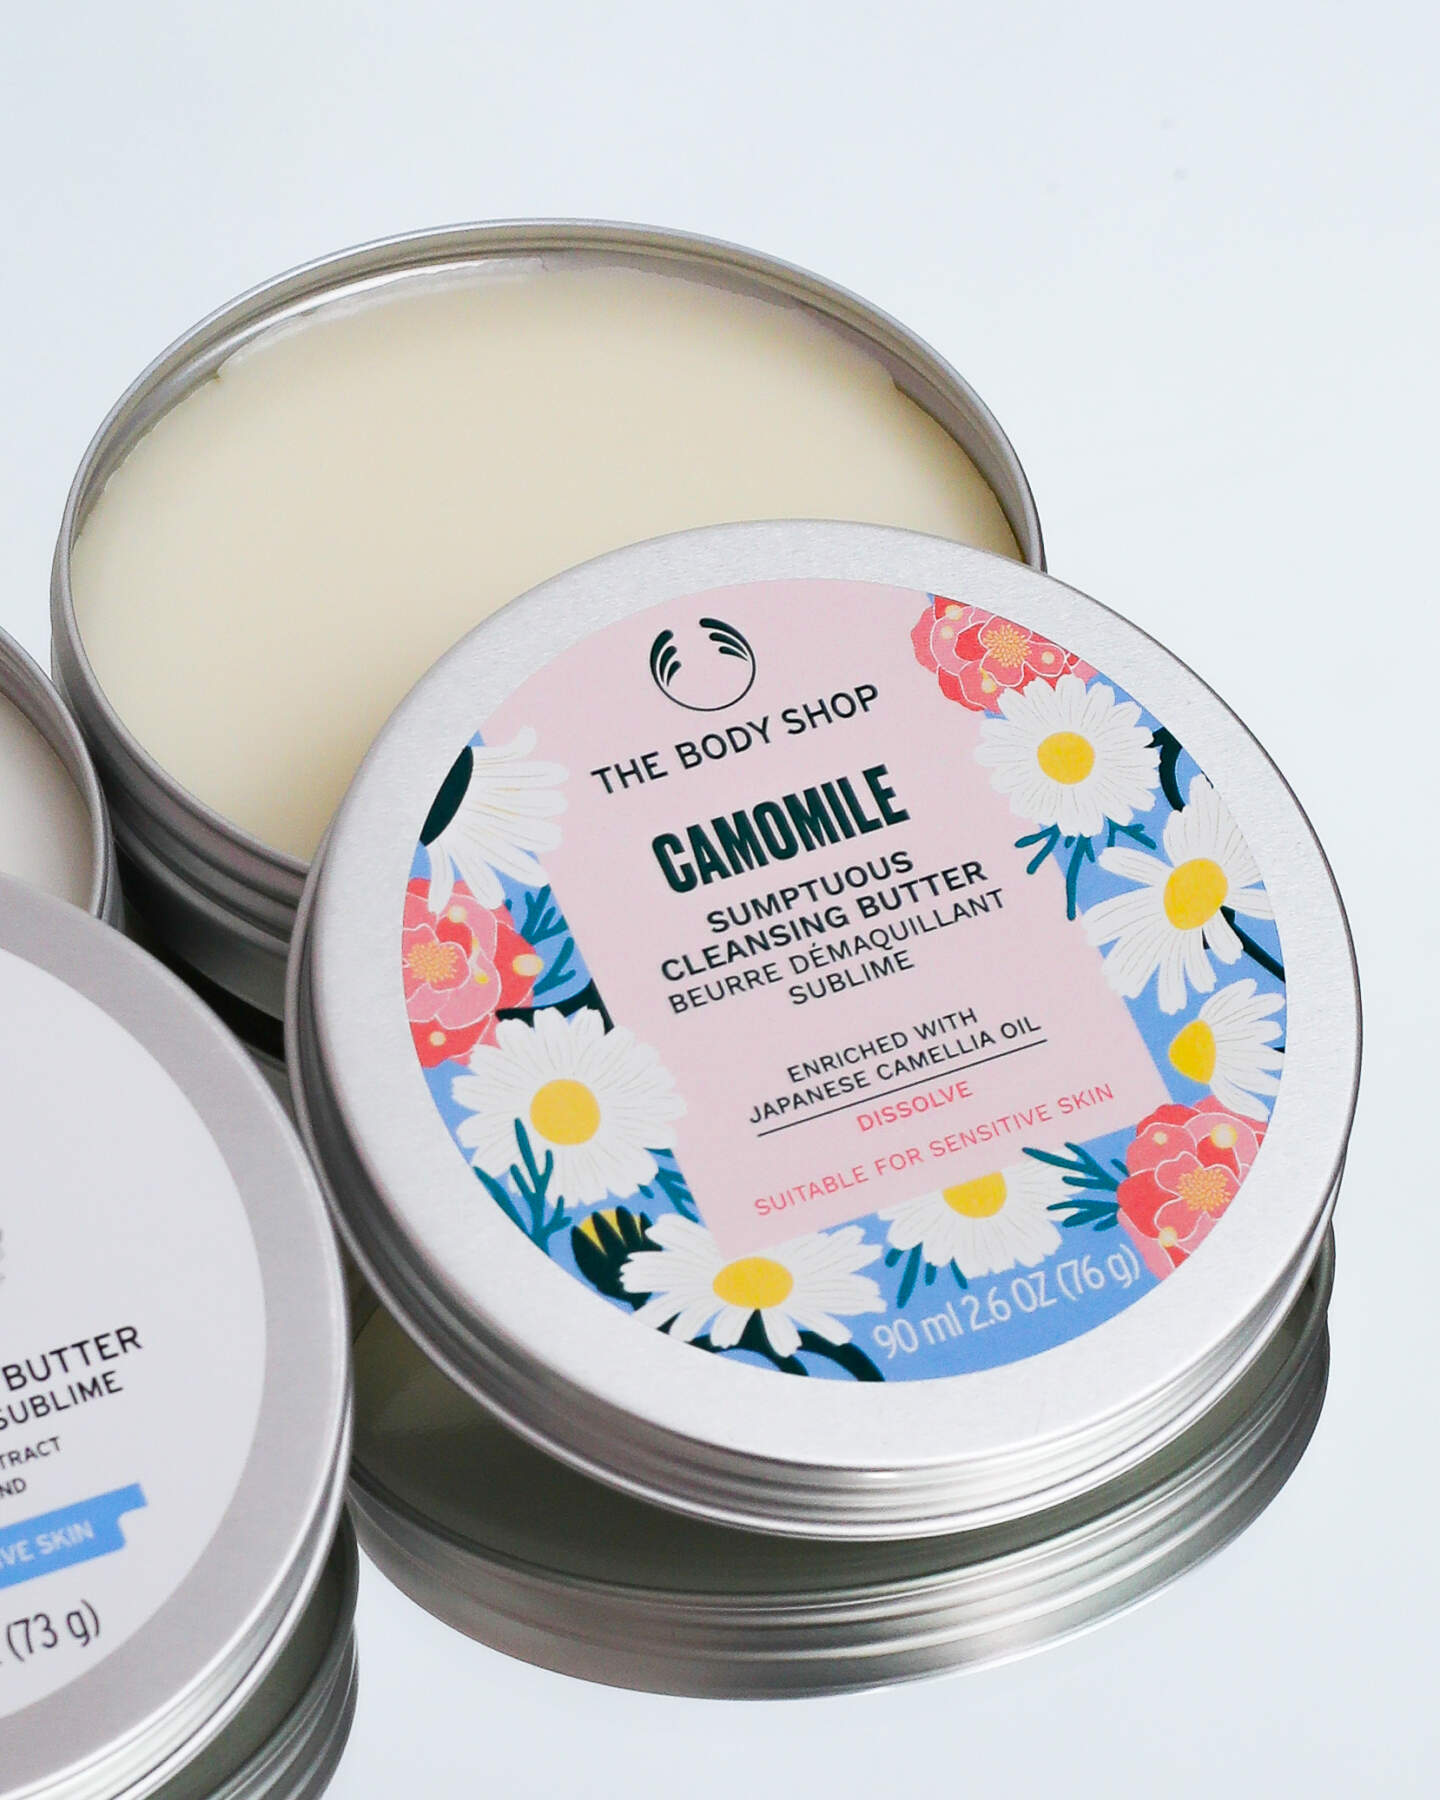 Limited Edition The Body Shop Camomile Cleansing Butter - Camellia - Caroline Hirons